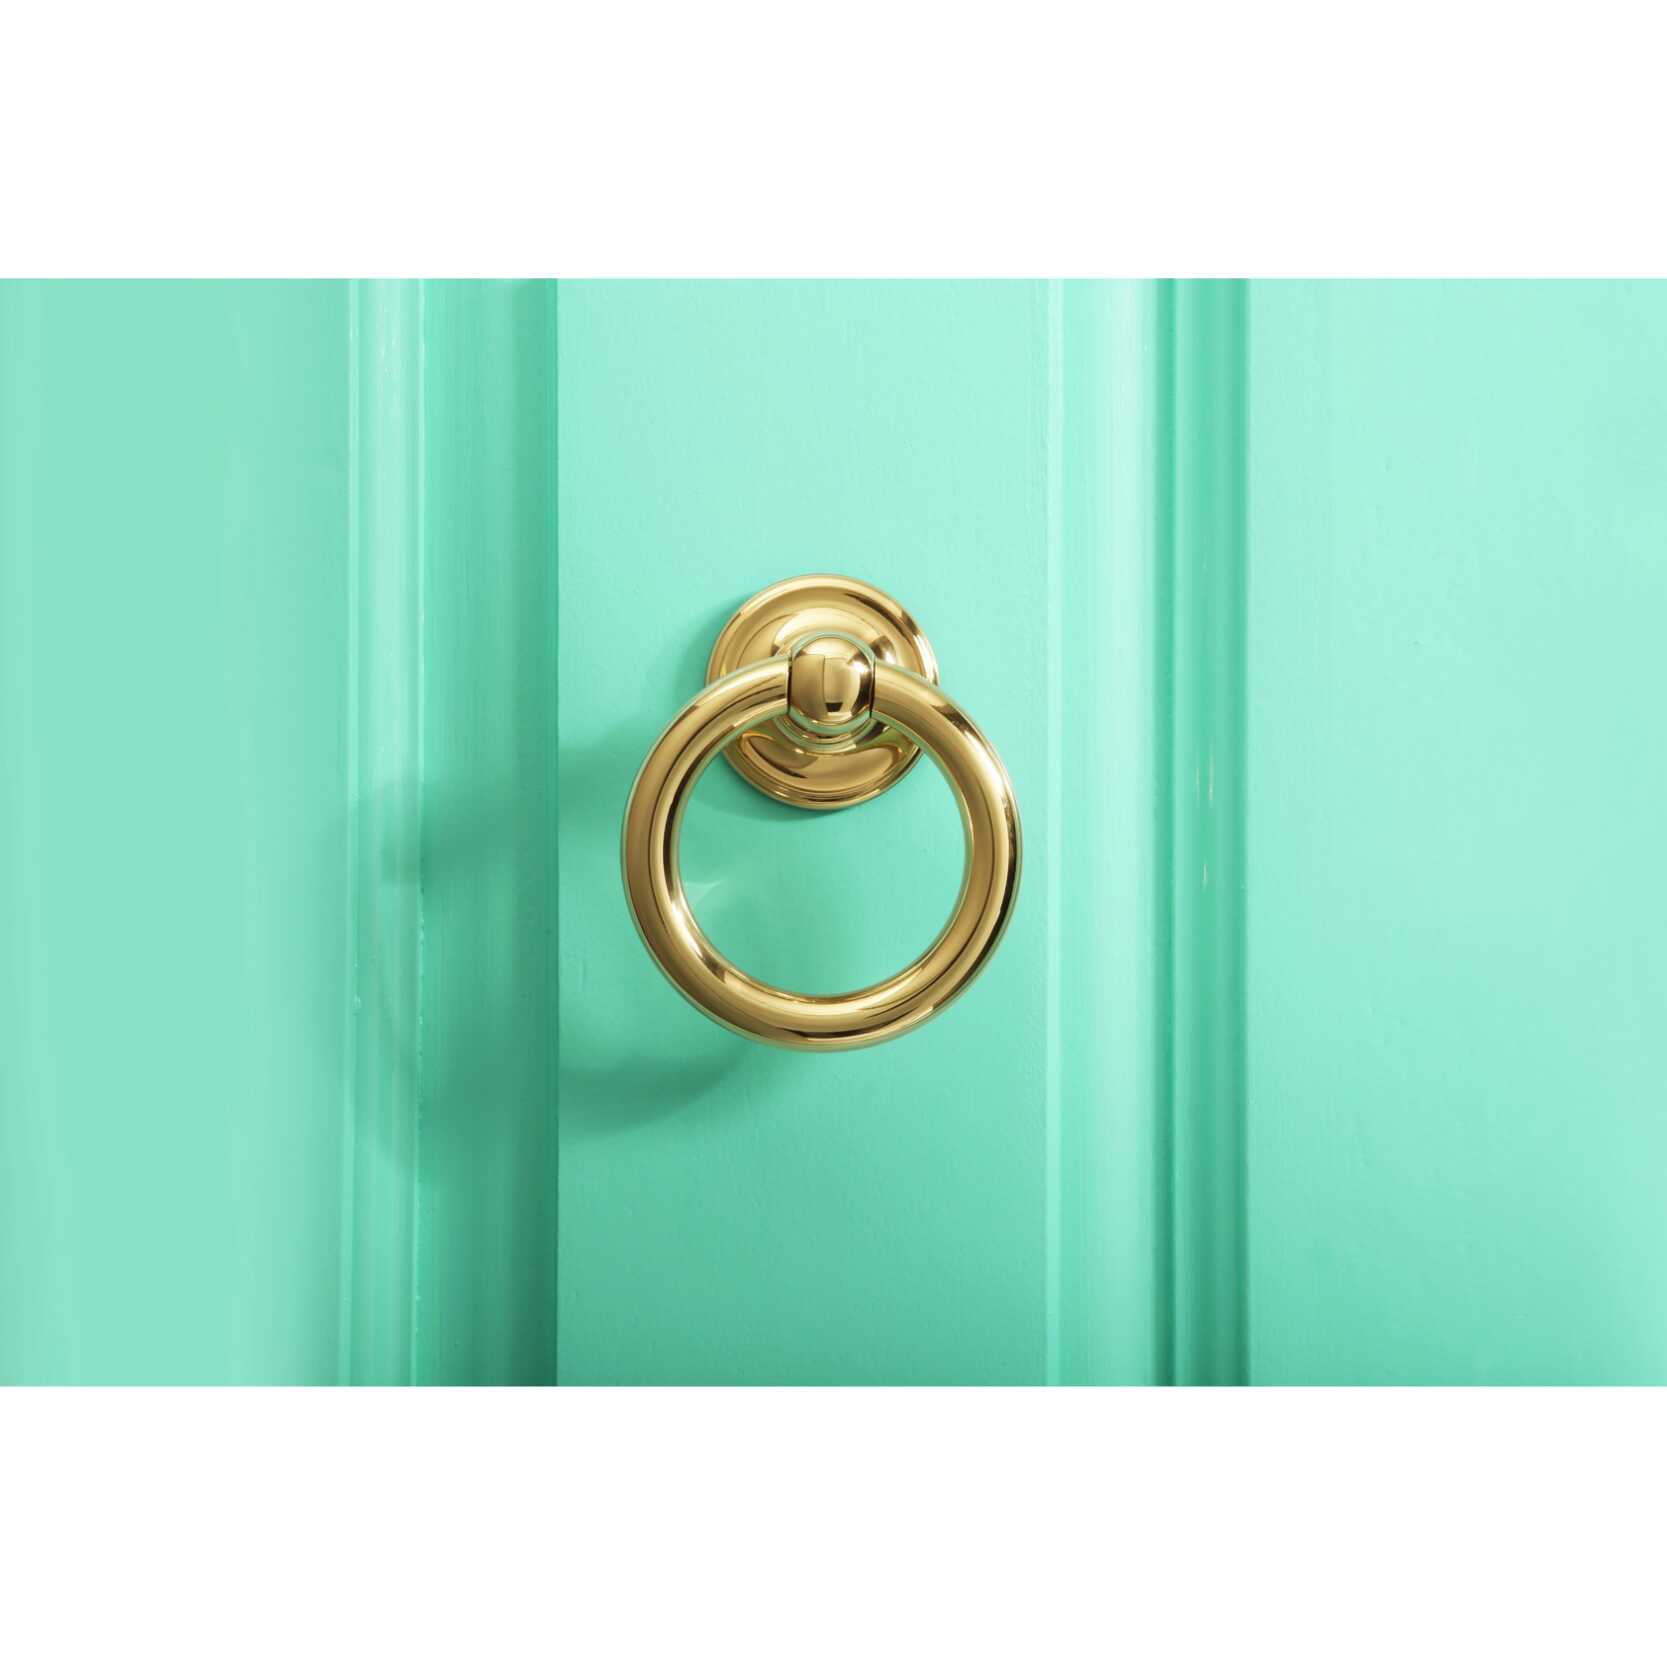 English vocabulary with pictures - Parts of a house - Door knocker